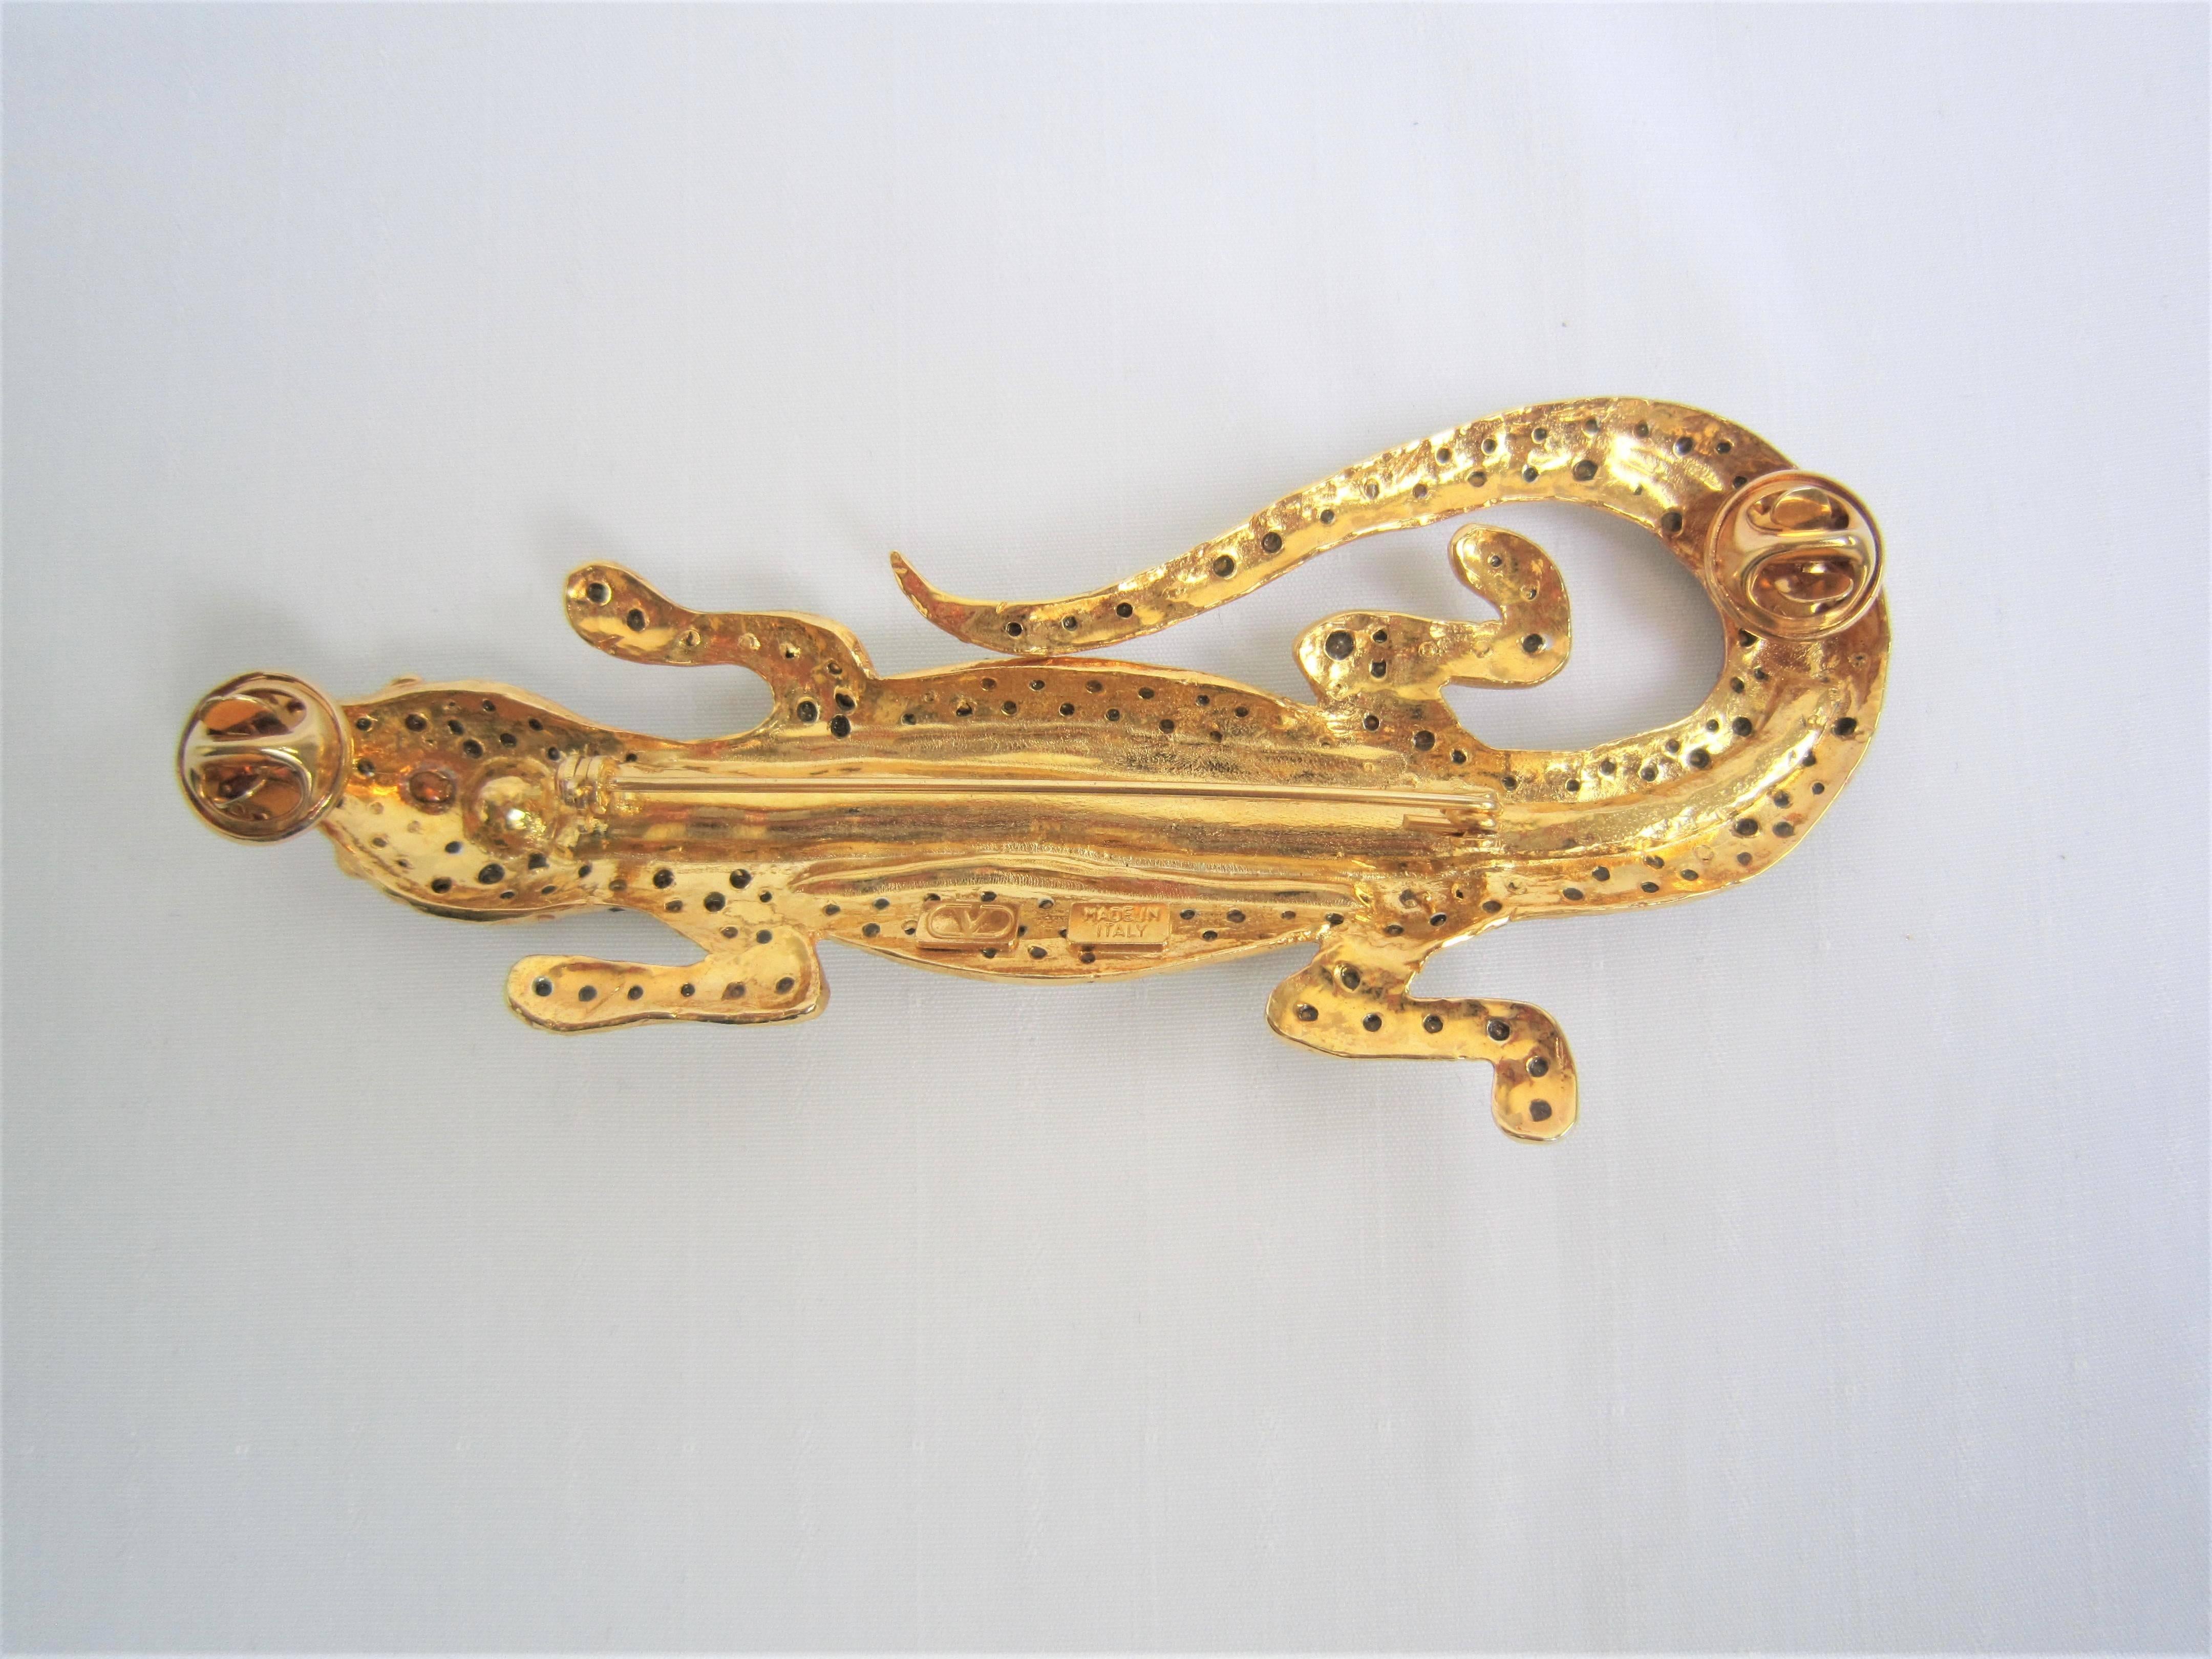 Stunning huge Valentino swarovski lizard brooch,1980s

Brooch has two pins to fix it and don't make it move

This wonderful brooch comes from 80's Valentino Caravani catwalk

Brand: Valentino

Material: gold tone metal, swarovski

Condition: Good